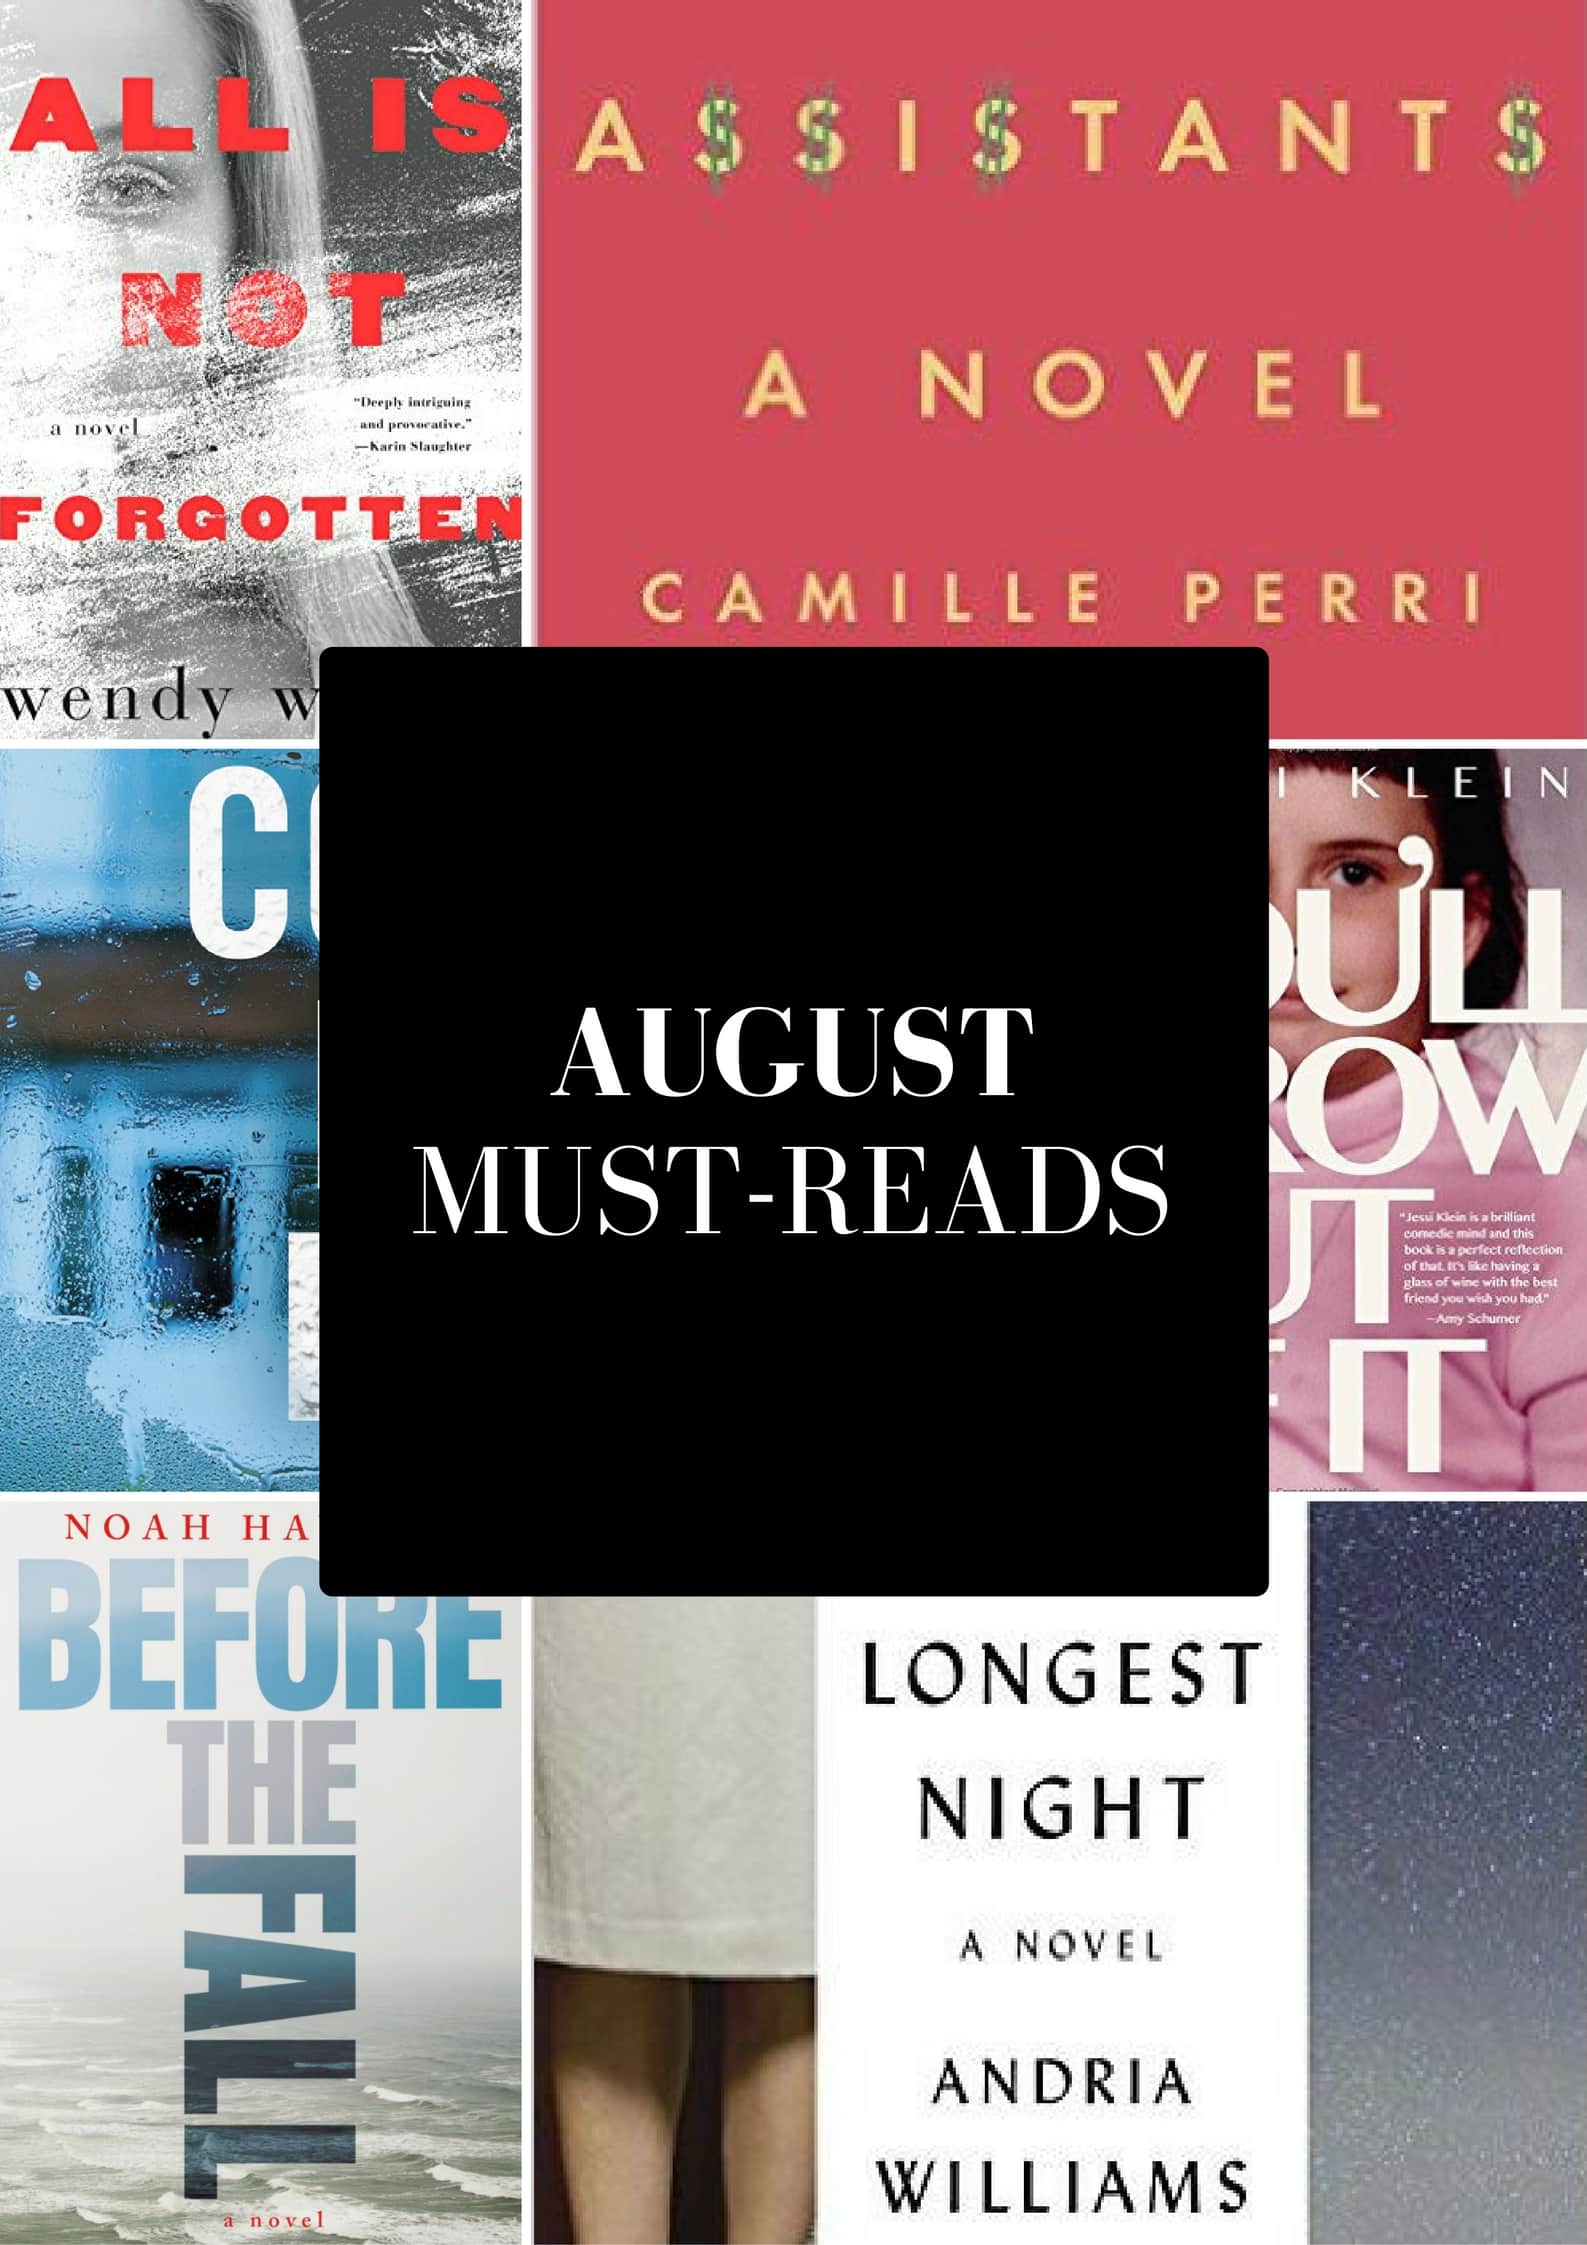 August 2016 Must-Reads